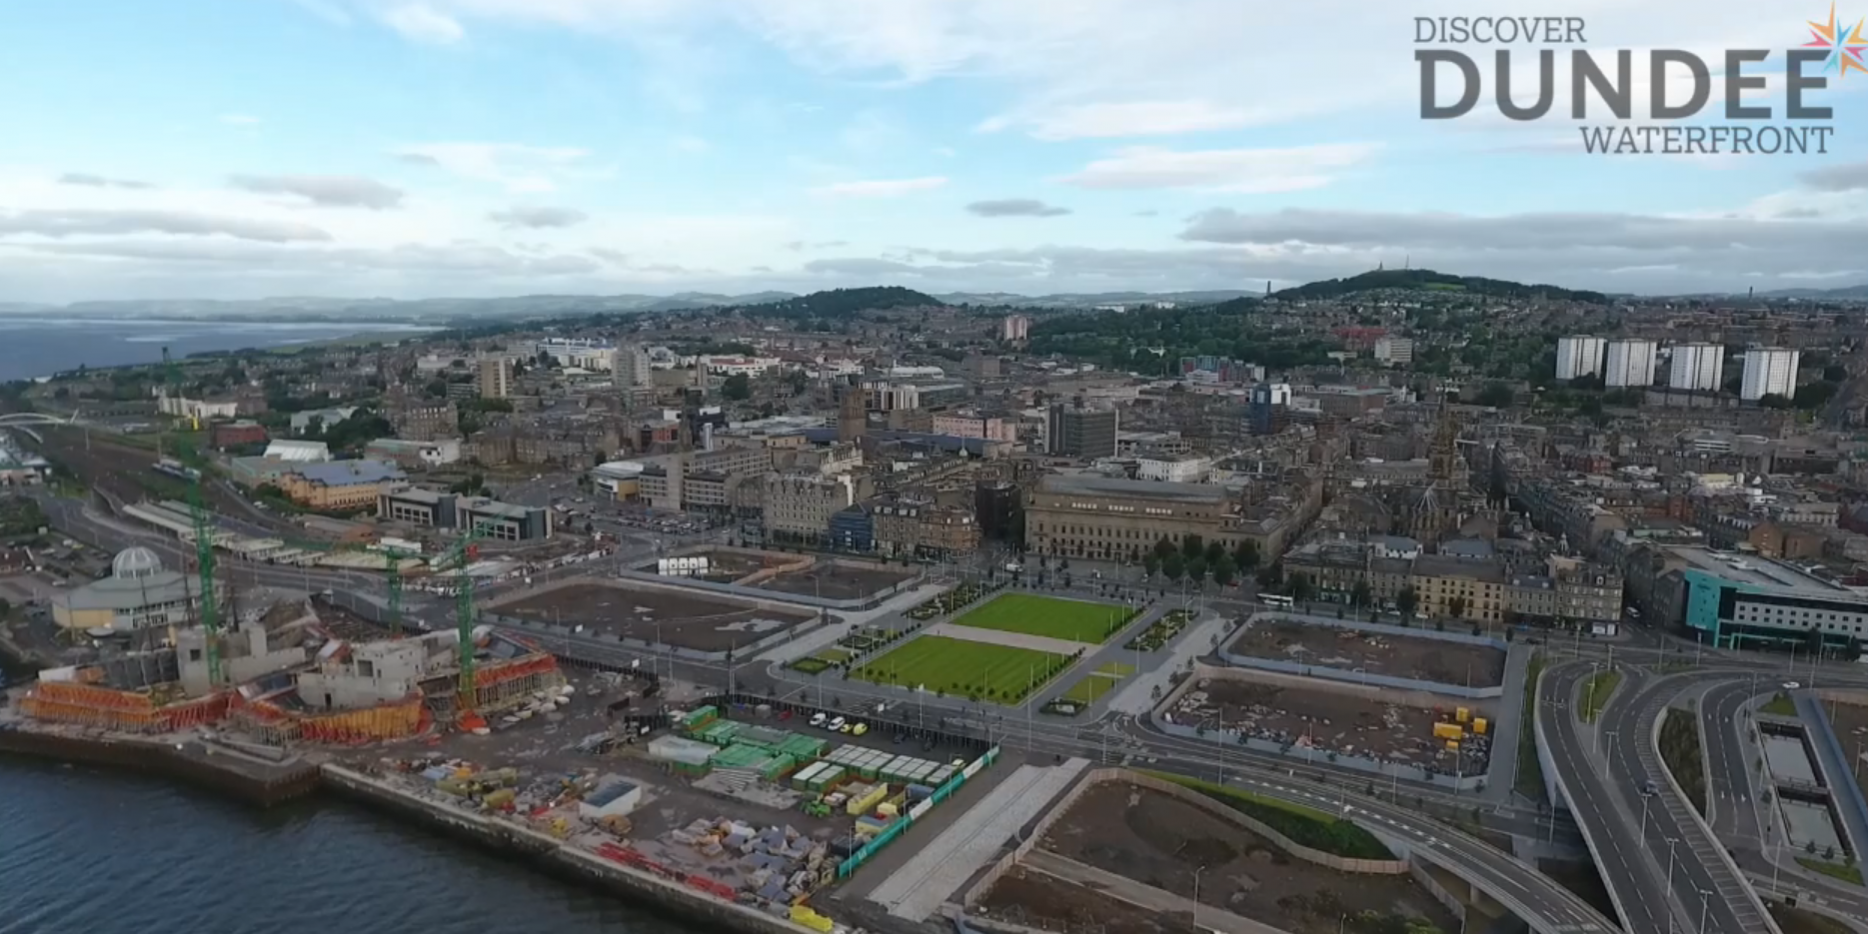 Discover Dundee Waterfront